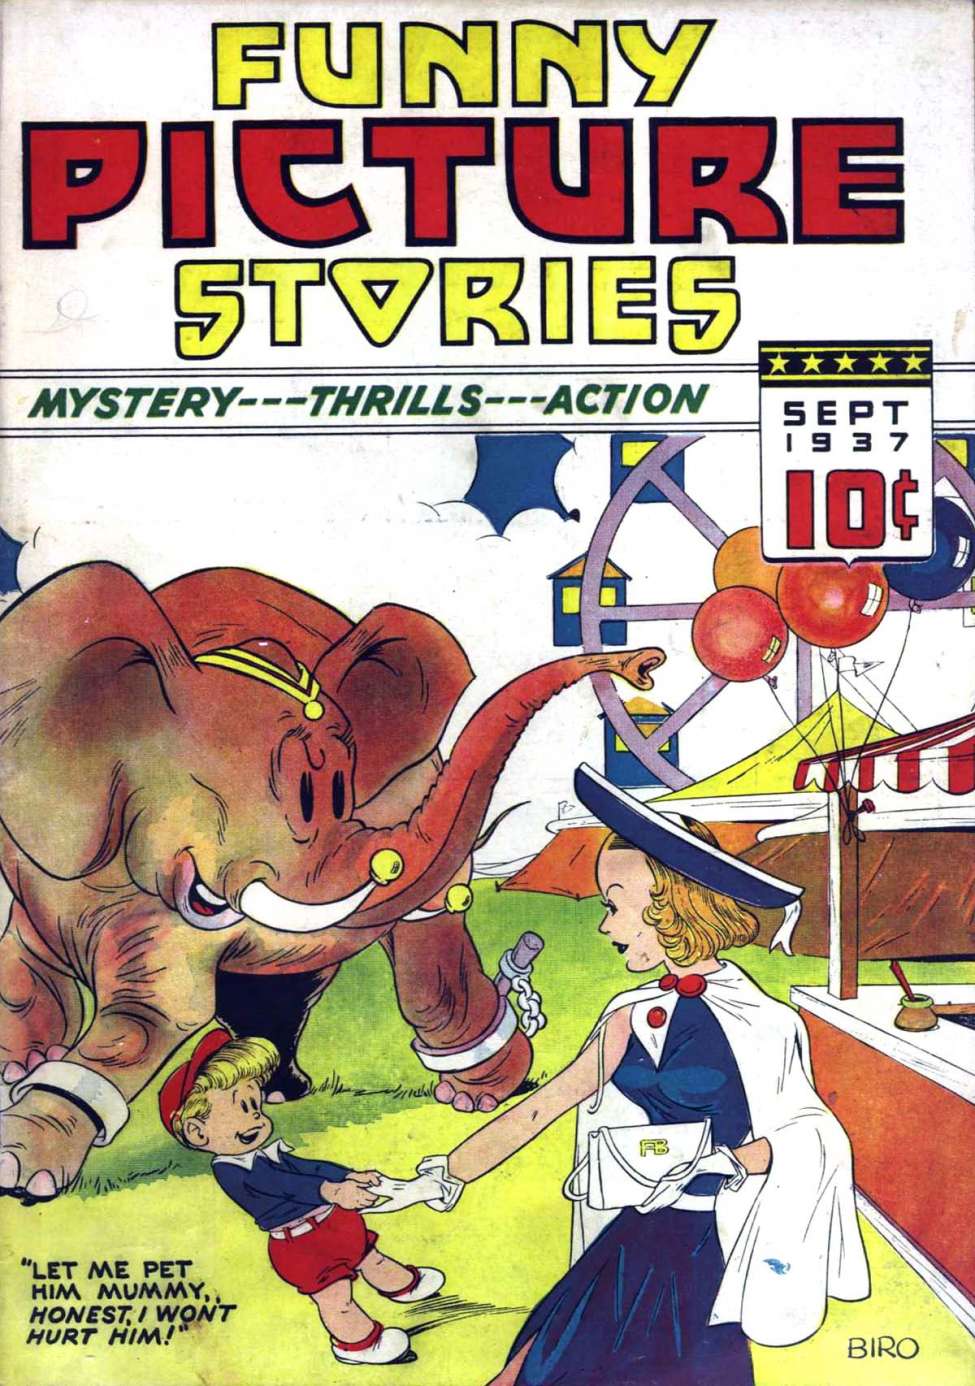 Book Cover For Funny Picture Stories v2 1